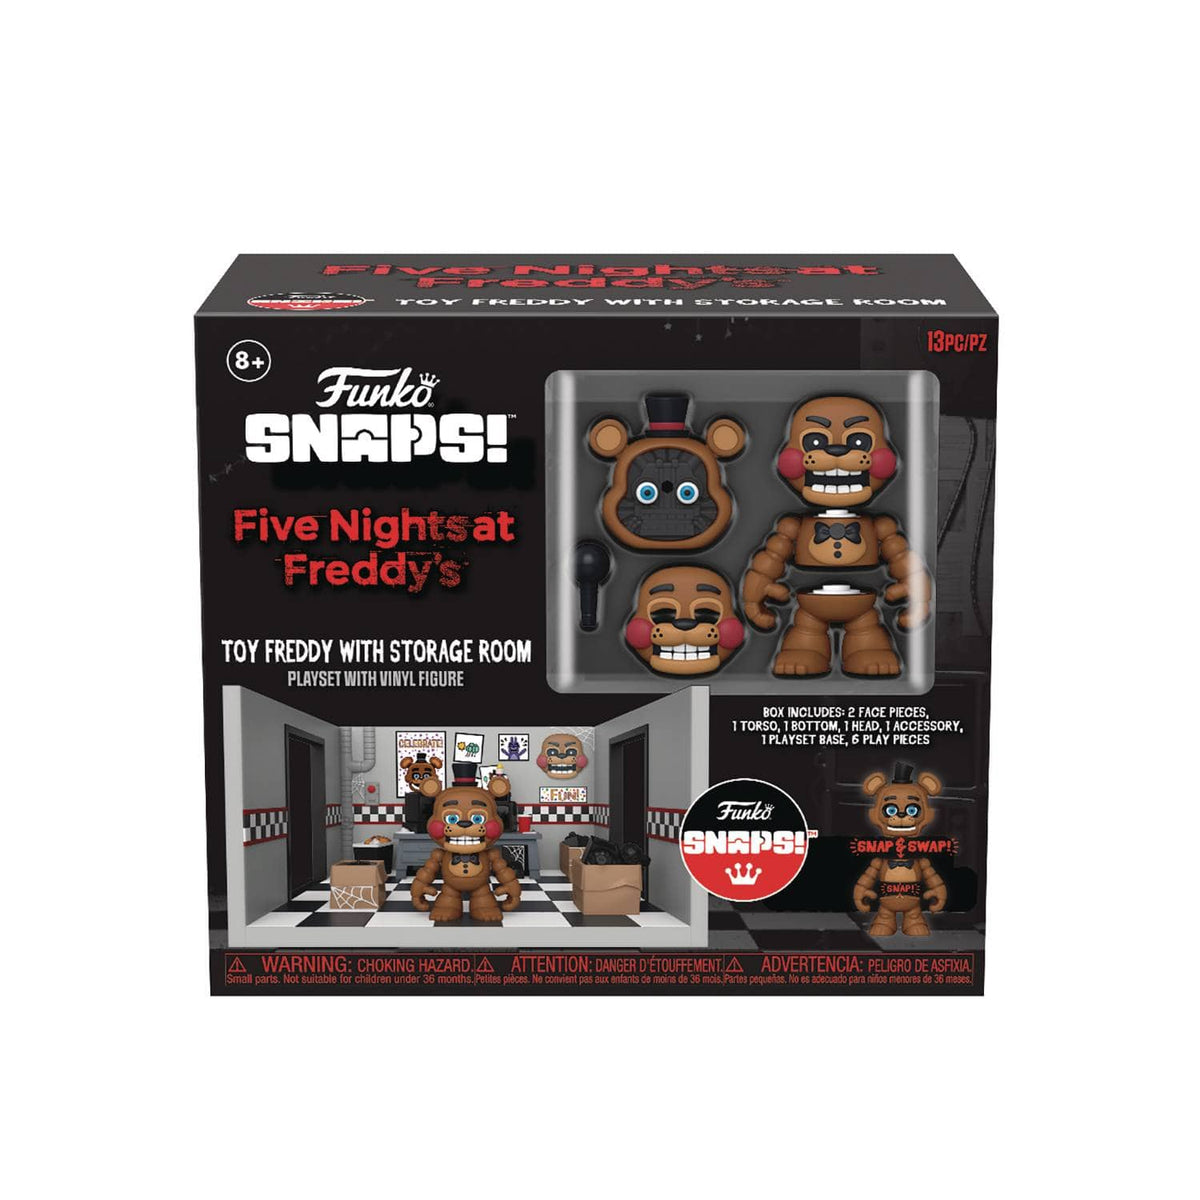 Funko Snaps!: Five Nights at Freddy's - Toy Freddy with Storage Room - Third Eye